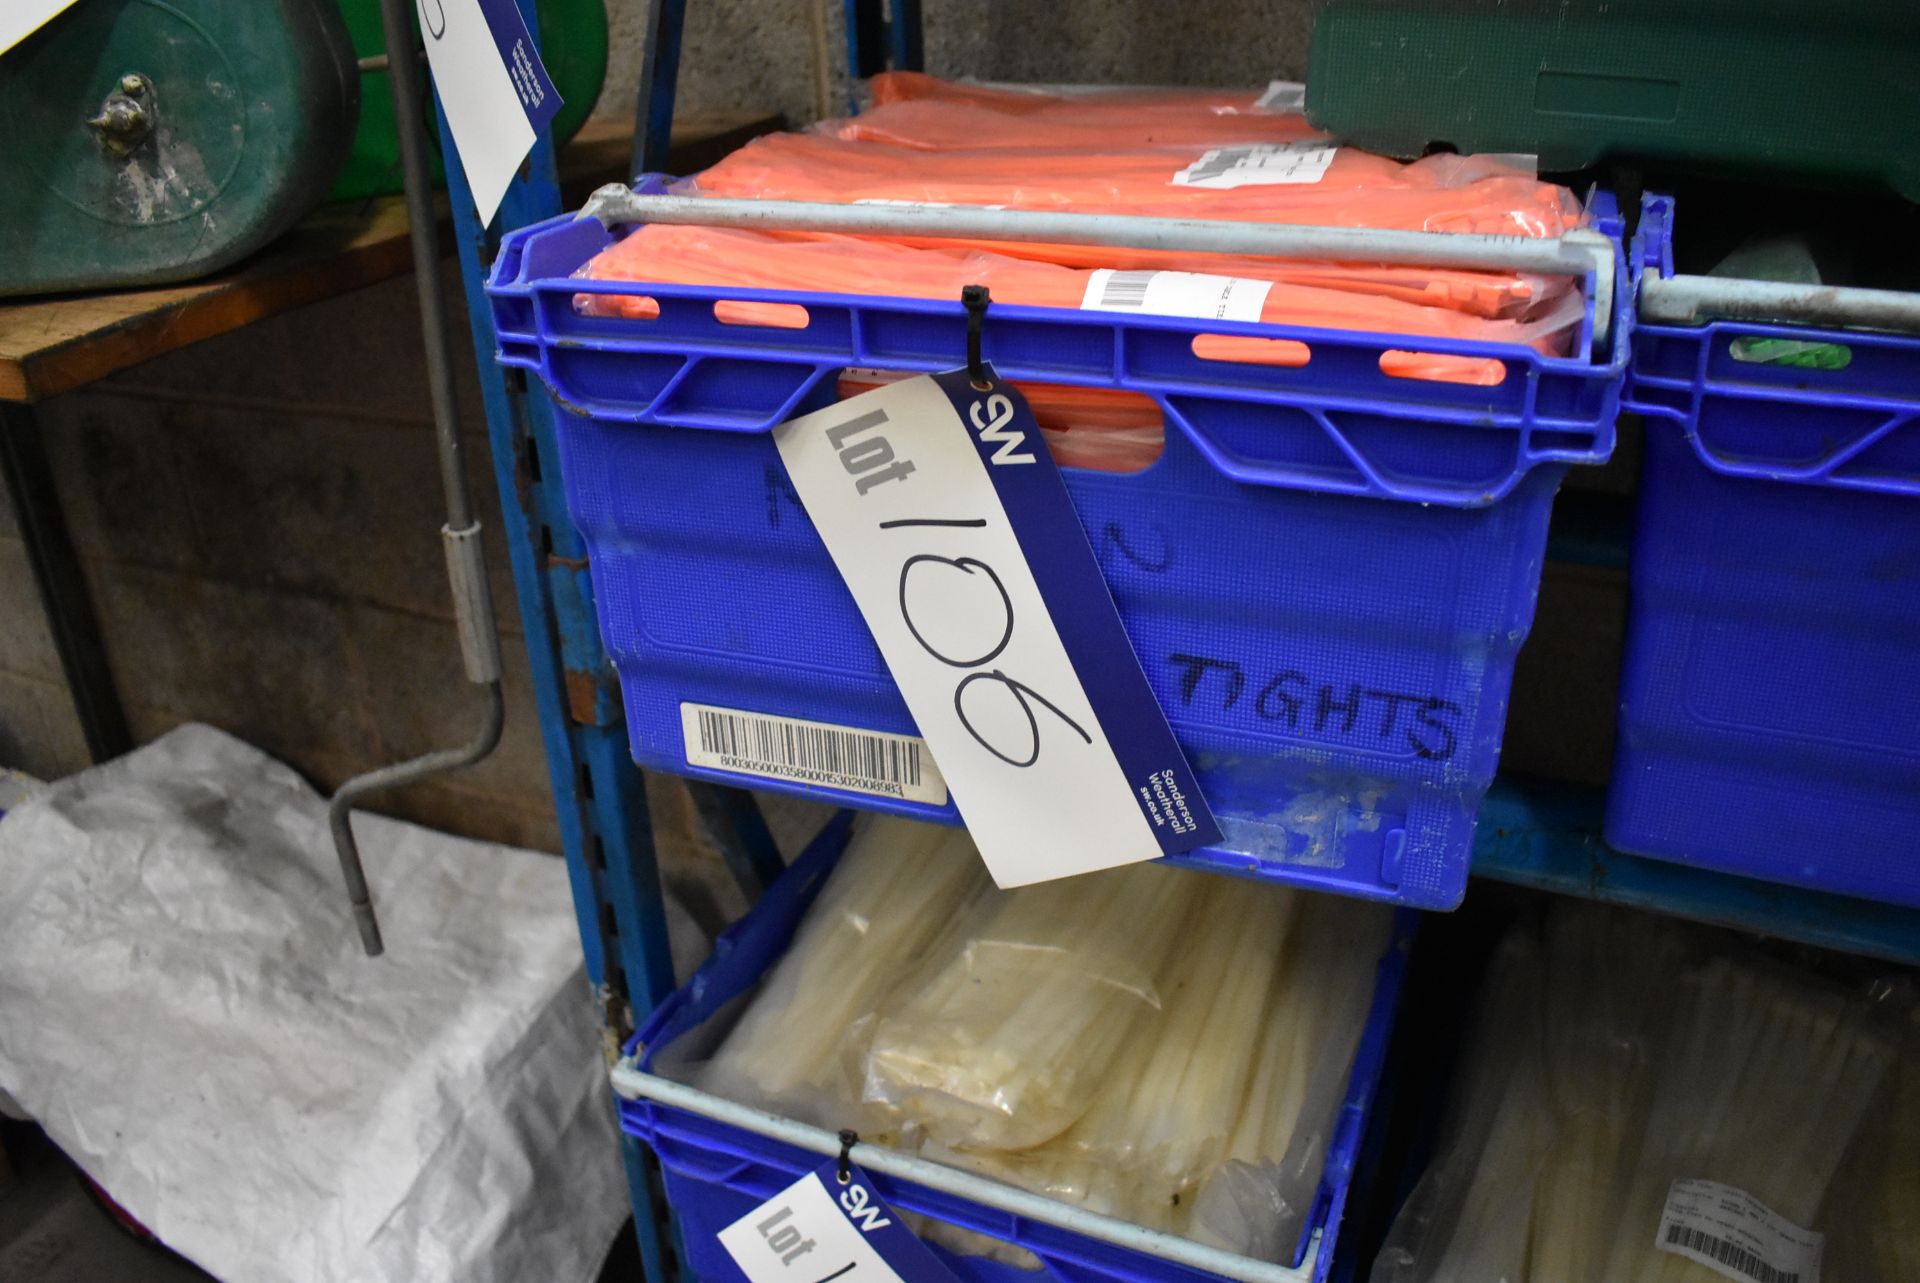 Approx. 75 Bags x 100 4.8 x 300mm Orange Cable Ties, with plastic crate